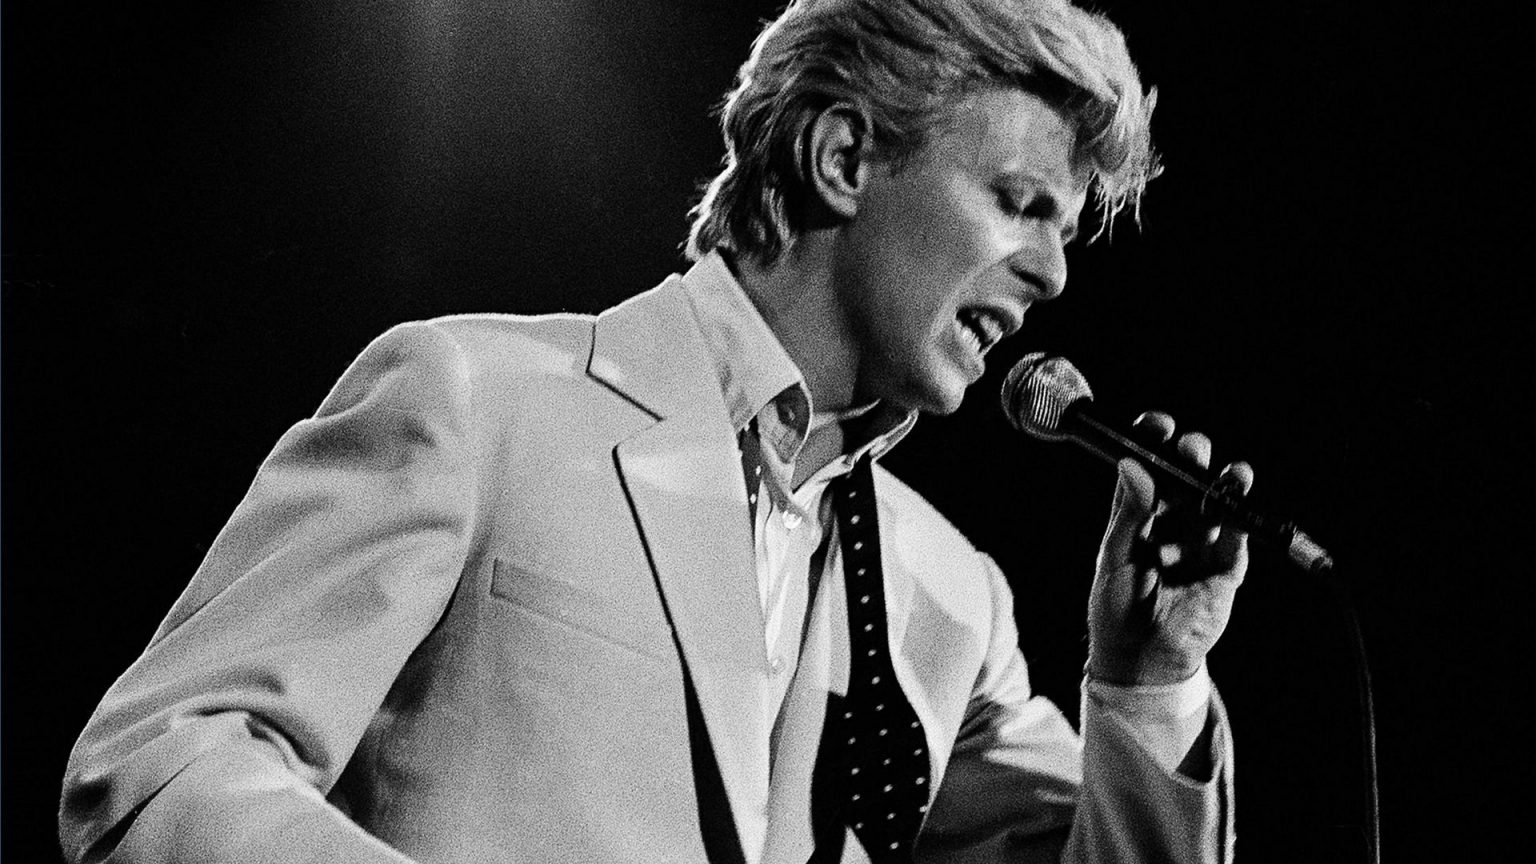 Film Poster Bowie: The Man Who Changed The World